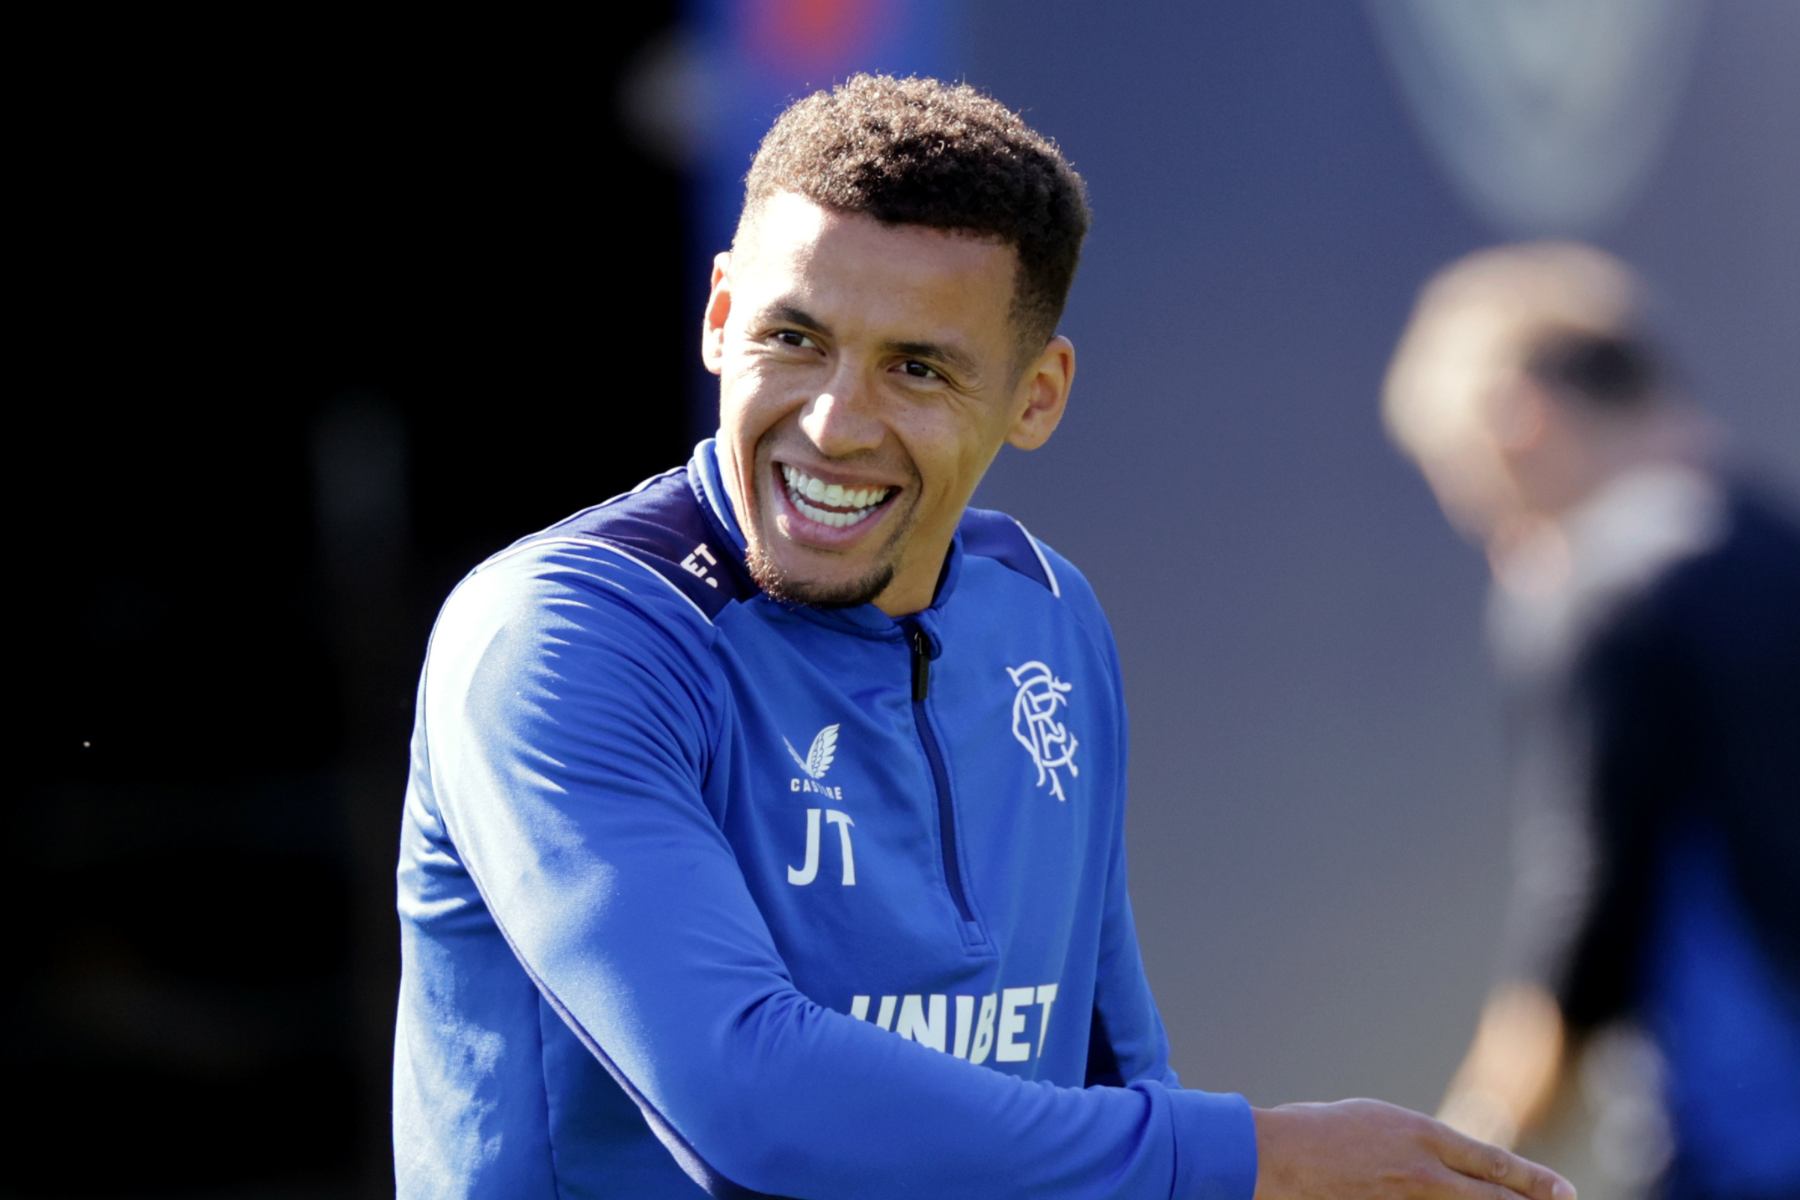 Rangers skipper James Tavernier eager to go on offensive at Anfield despite his brother’s nine goal Liverpool mauling